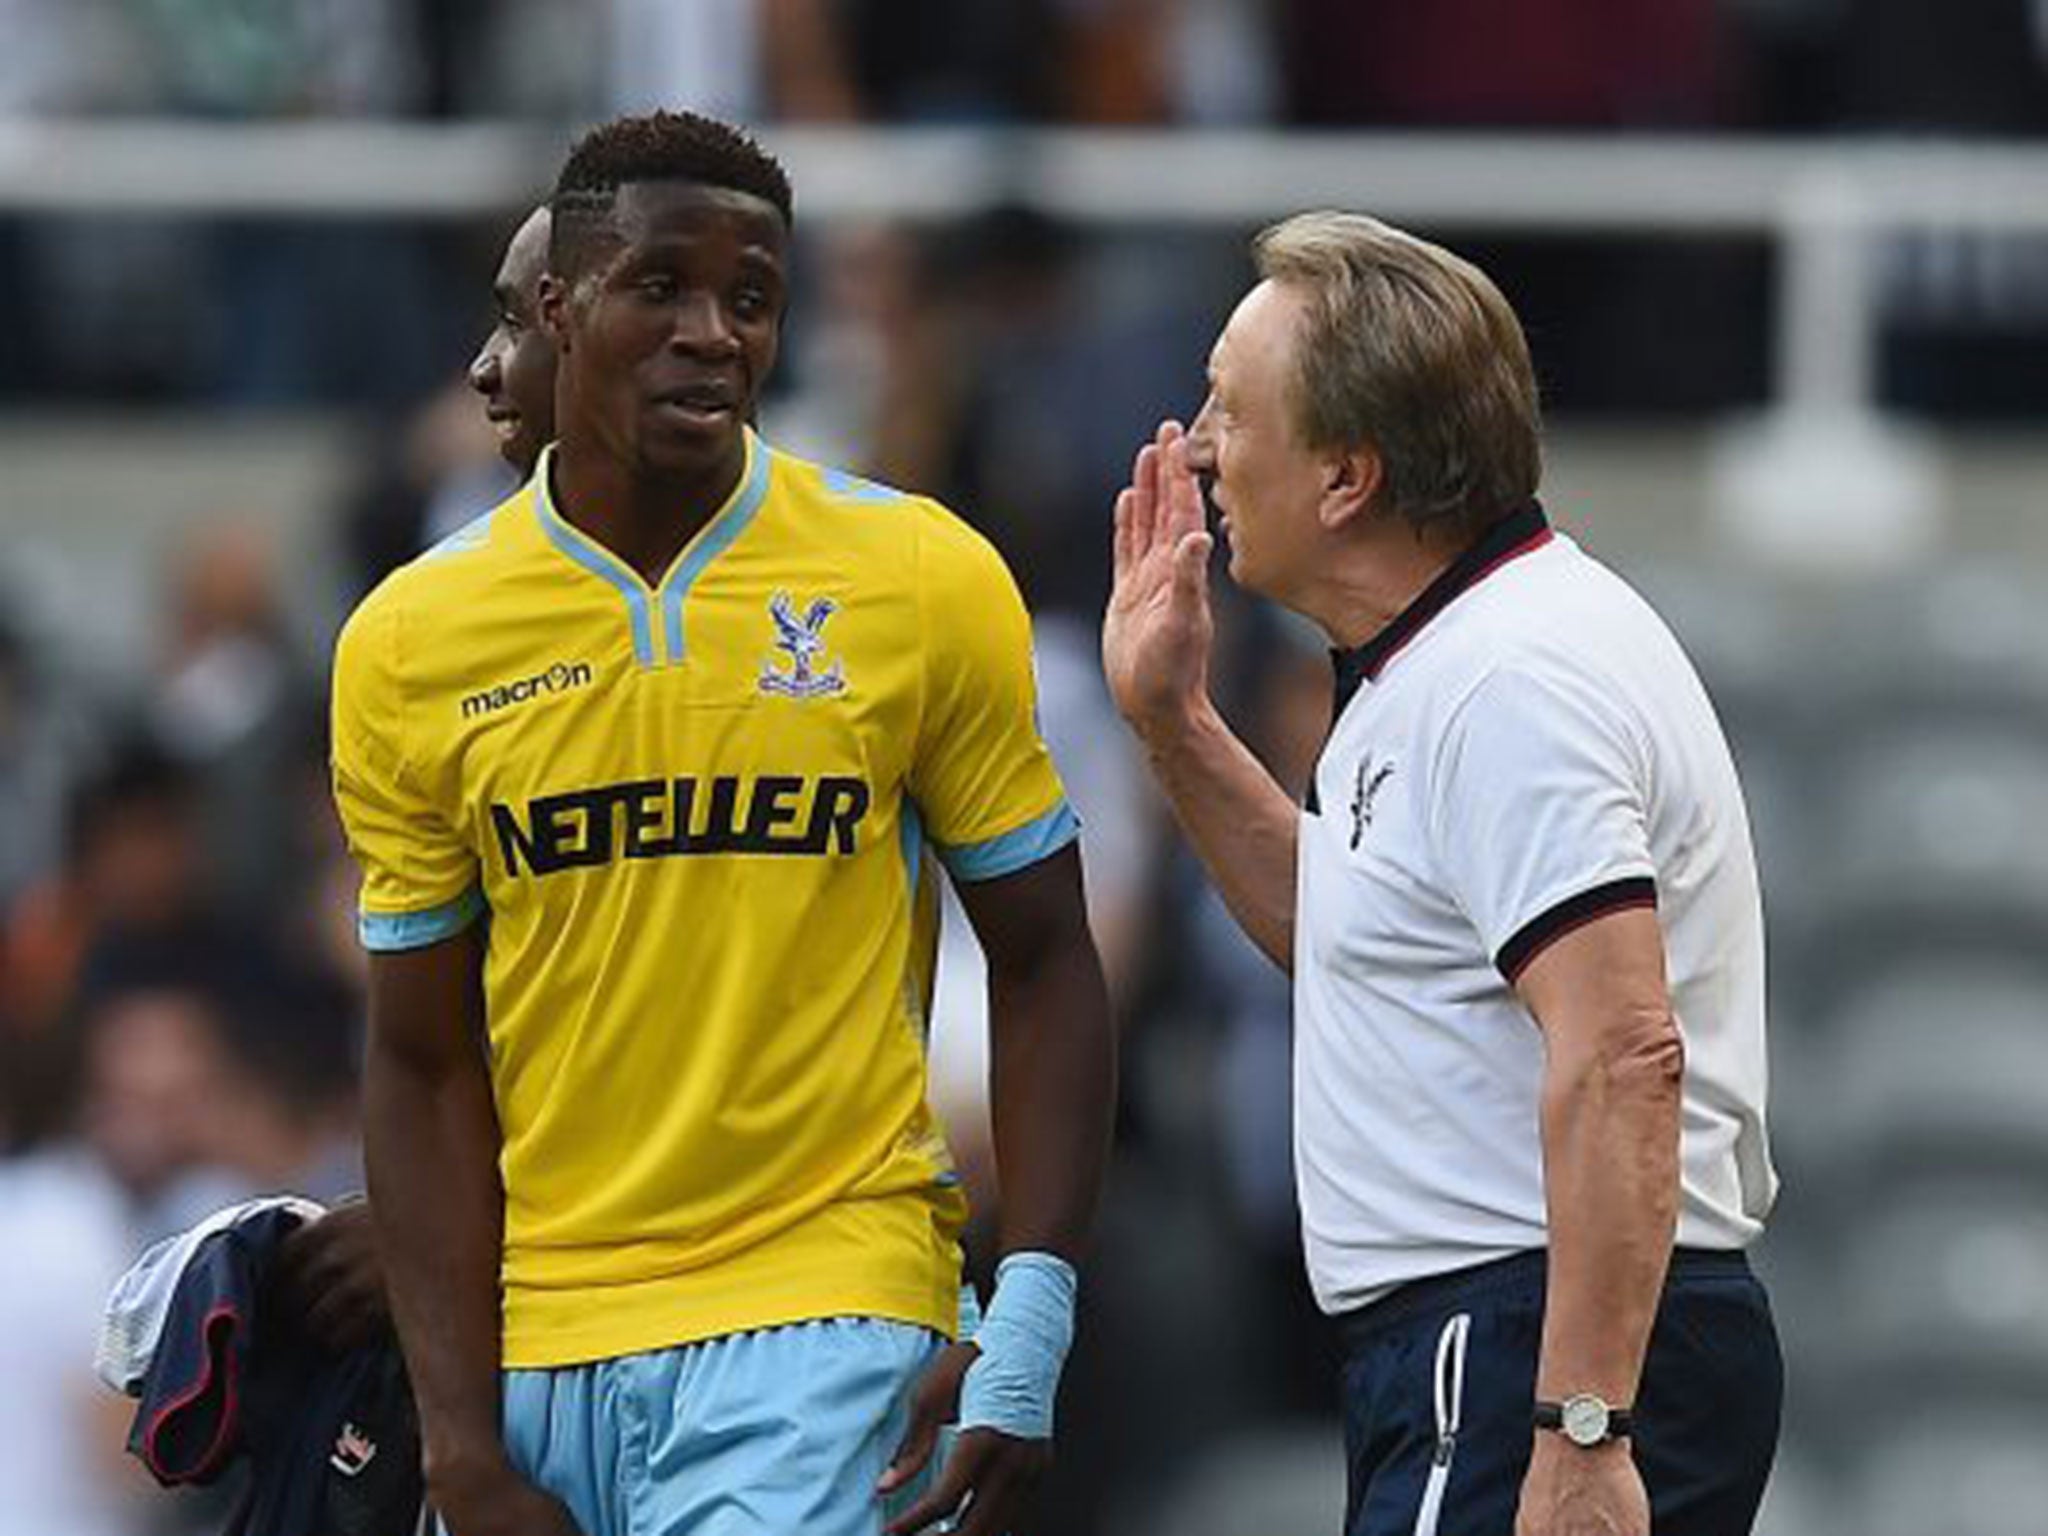 Palace’s new manager, Neil Warnock, high-fives with Wilfried Zaha after the final whistle